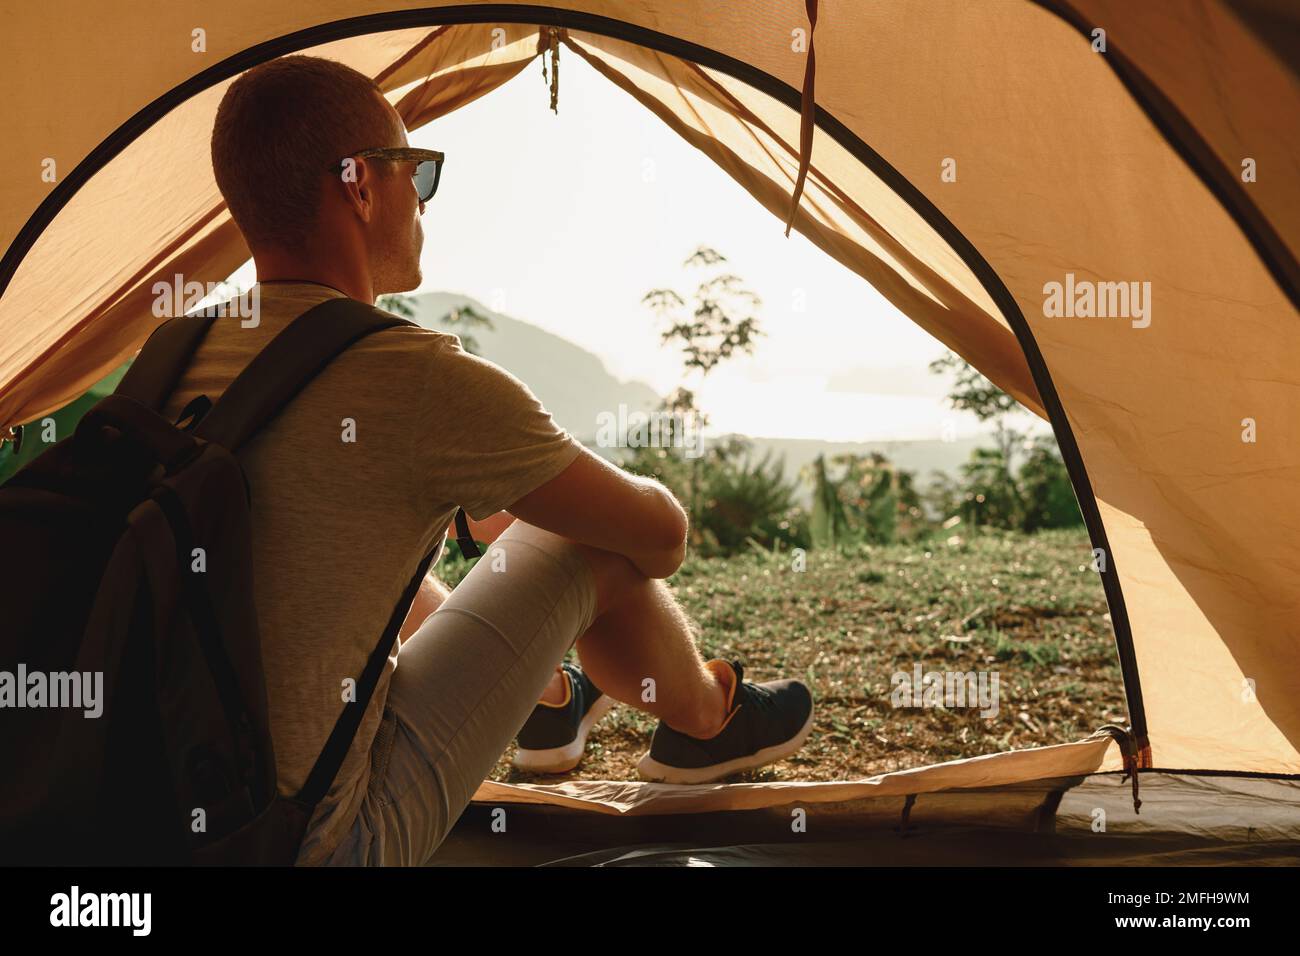 One young hiker man with backpack sits in tent and looks at sunrise or sunset Stock Photo